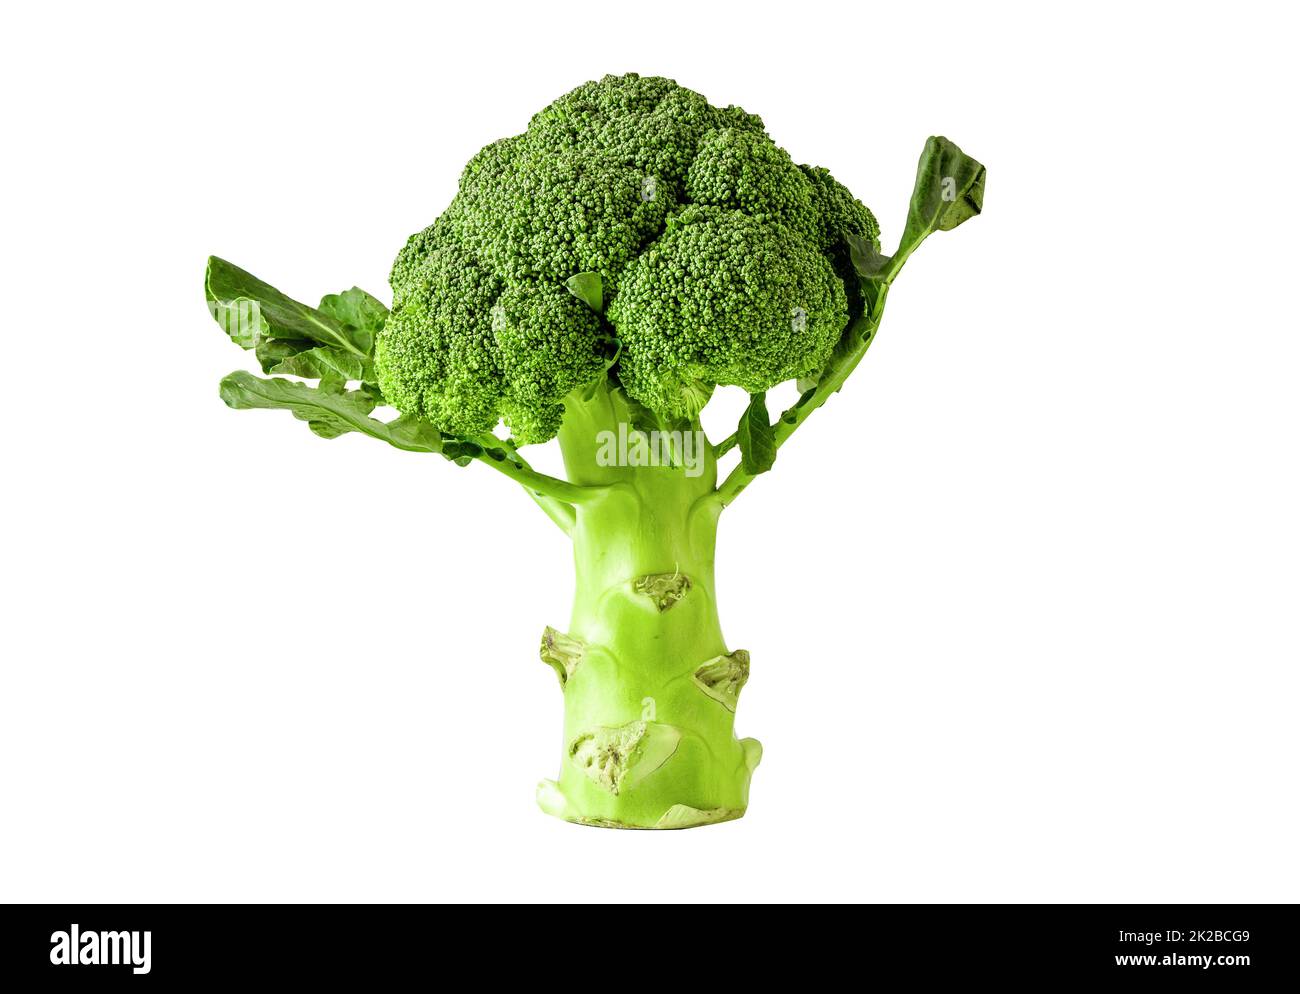 Broccoli vegetable isolated on white background with clipping path. Stock Photo